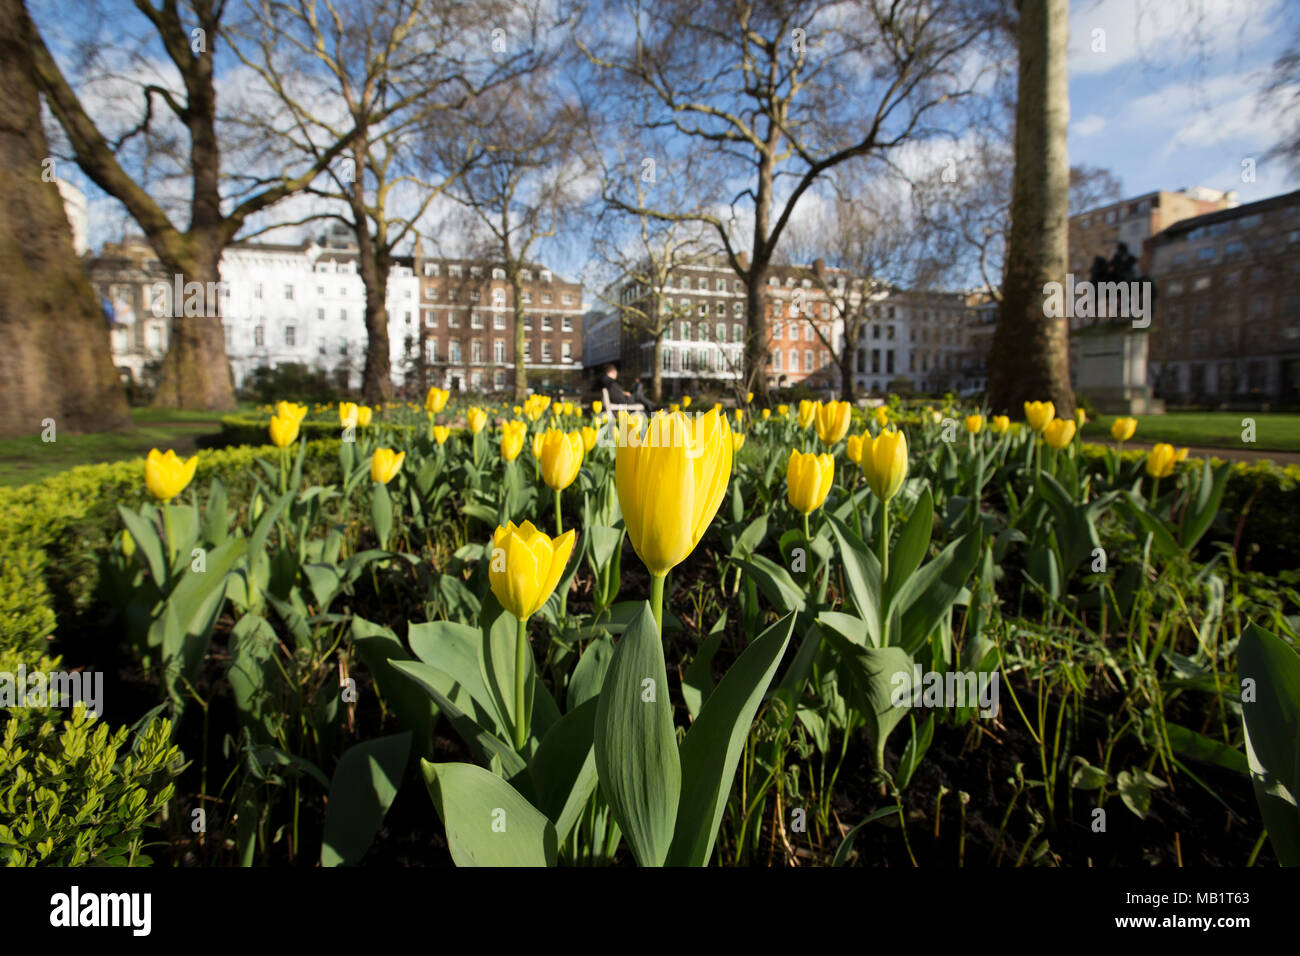 St James's Square, one of London's most prestigious garden squares in the exclusive St James's district of City of Westminster, London, England, UK Stock Photo